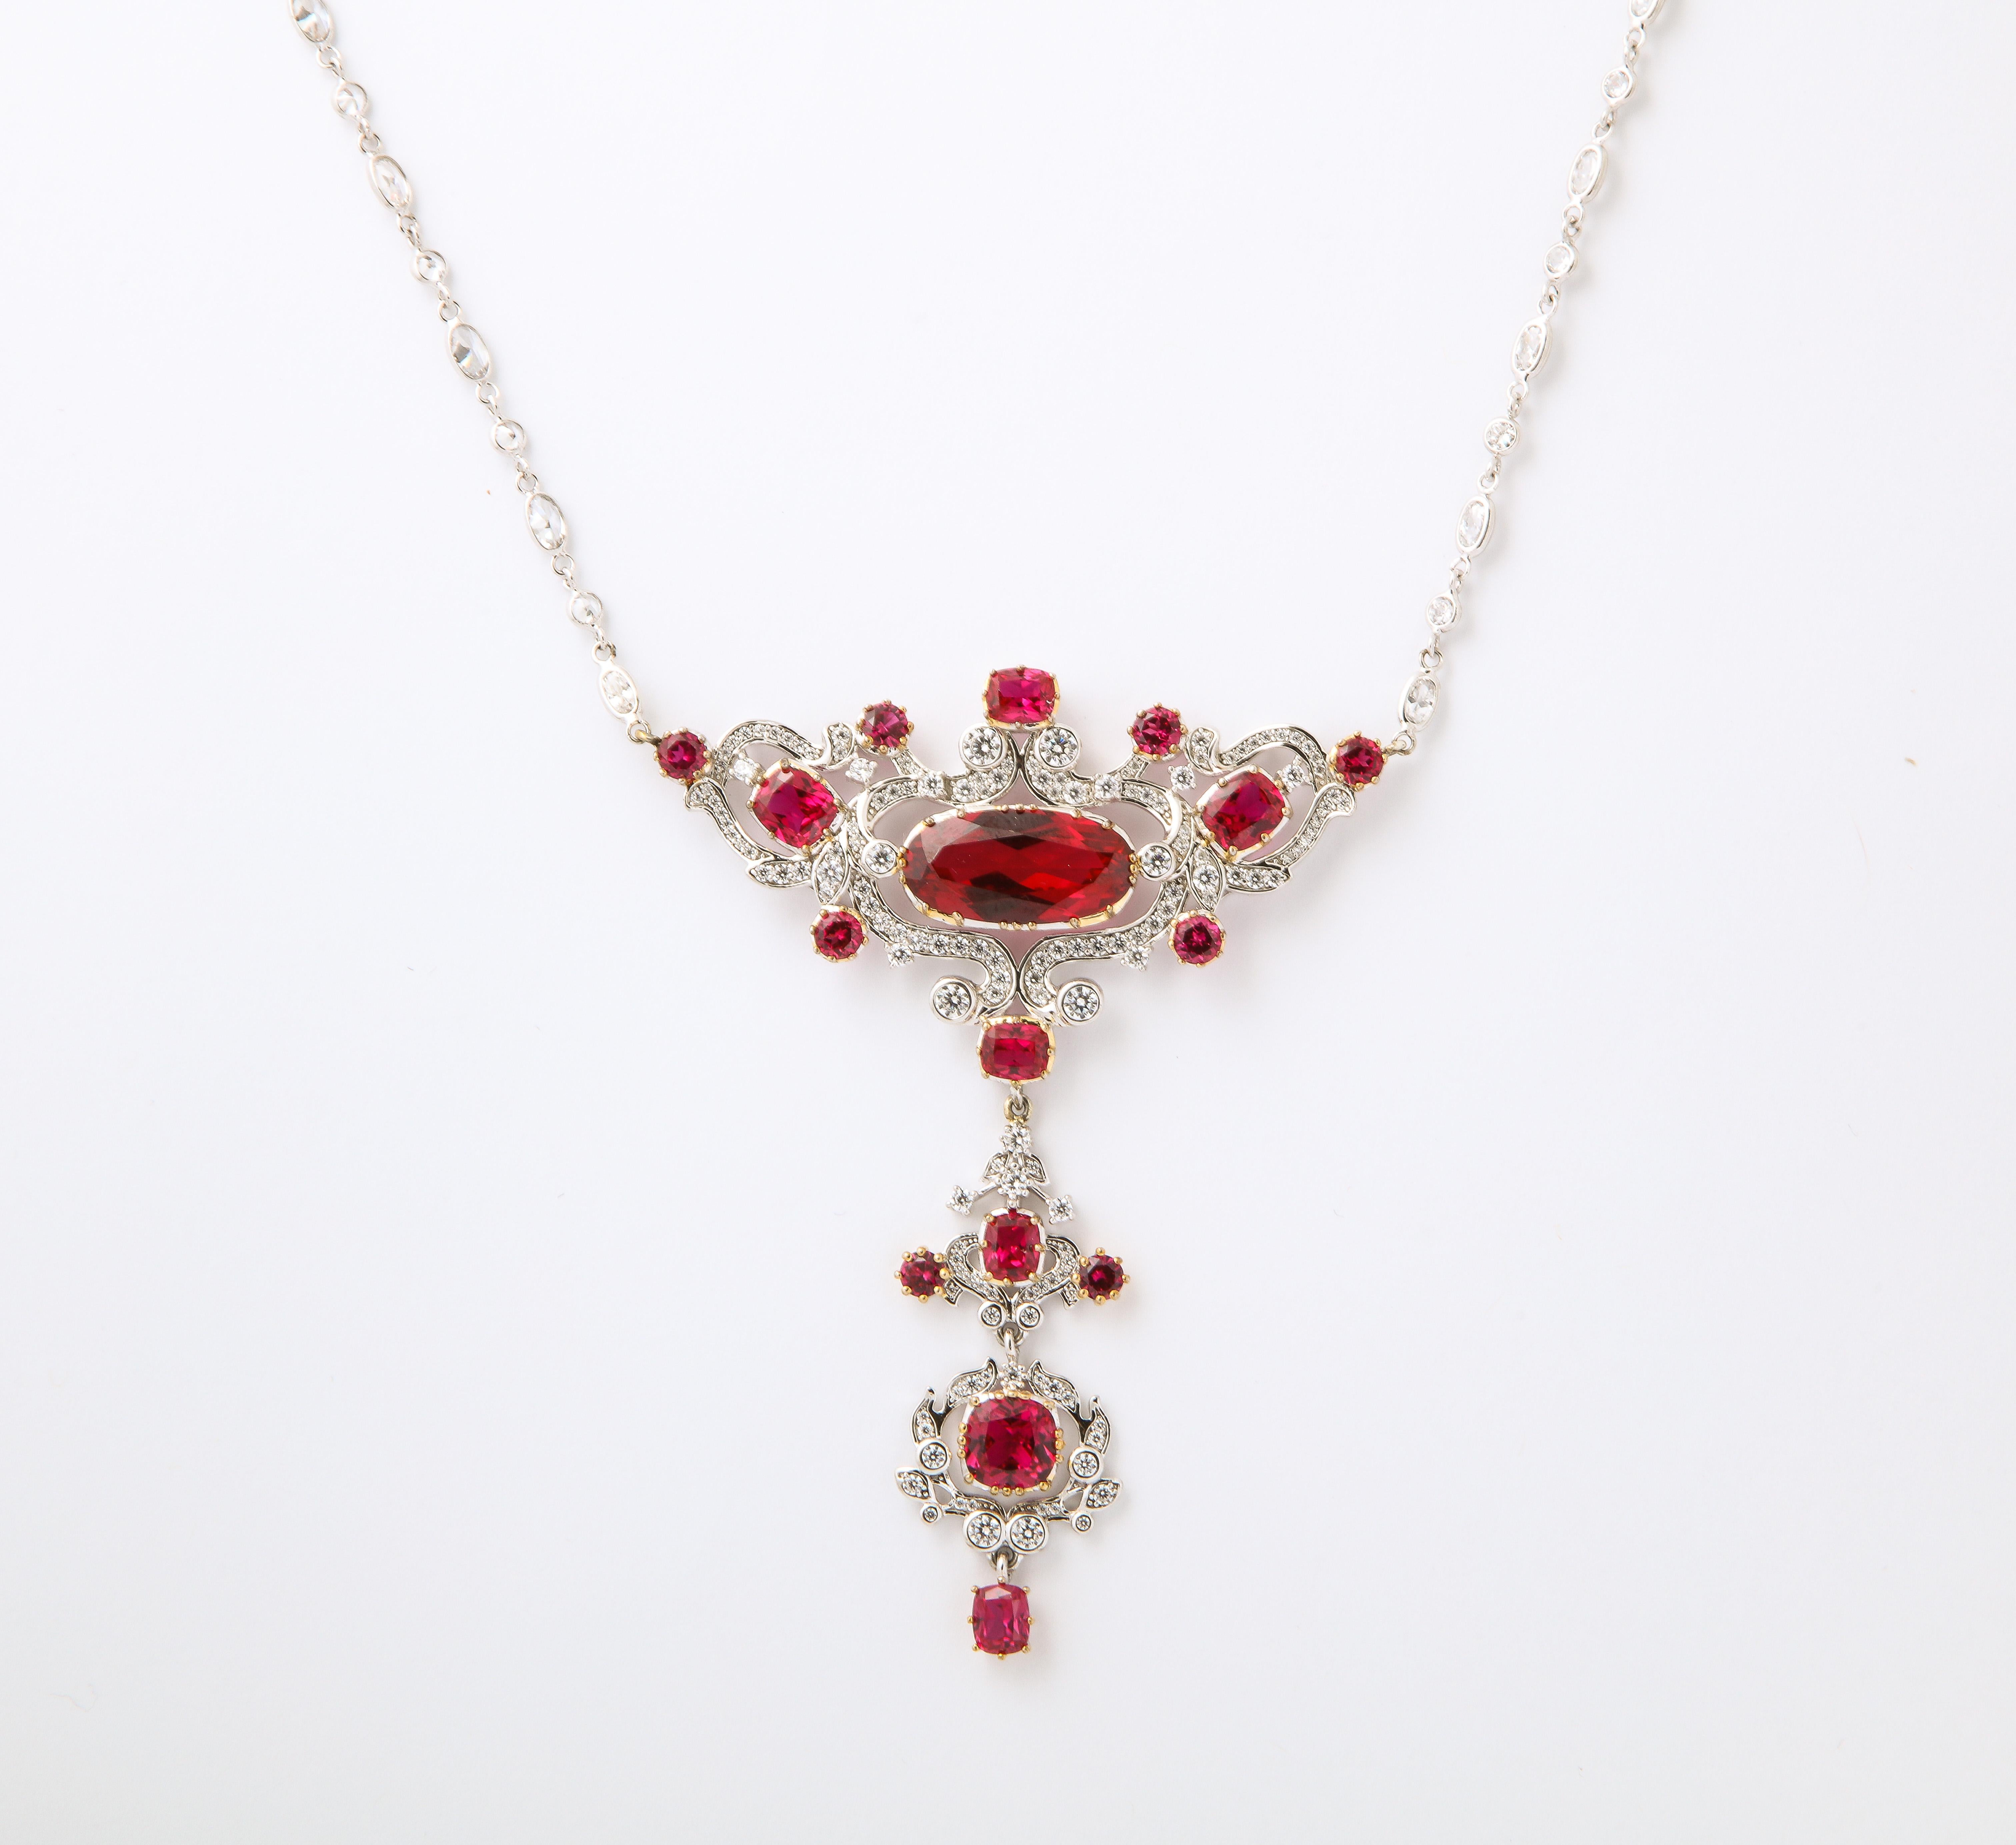 Edwardian Style Faux Pigeon Blood Ruby CZ Diamond Sterling Necklace
Almost straight from an historical jewelry collection, Art Nouveau Edwardian style delicate sterling CZ and man made rubies vermeil set  pendant hanging from a sterling CZ set